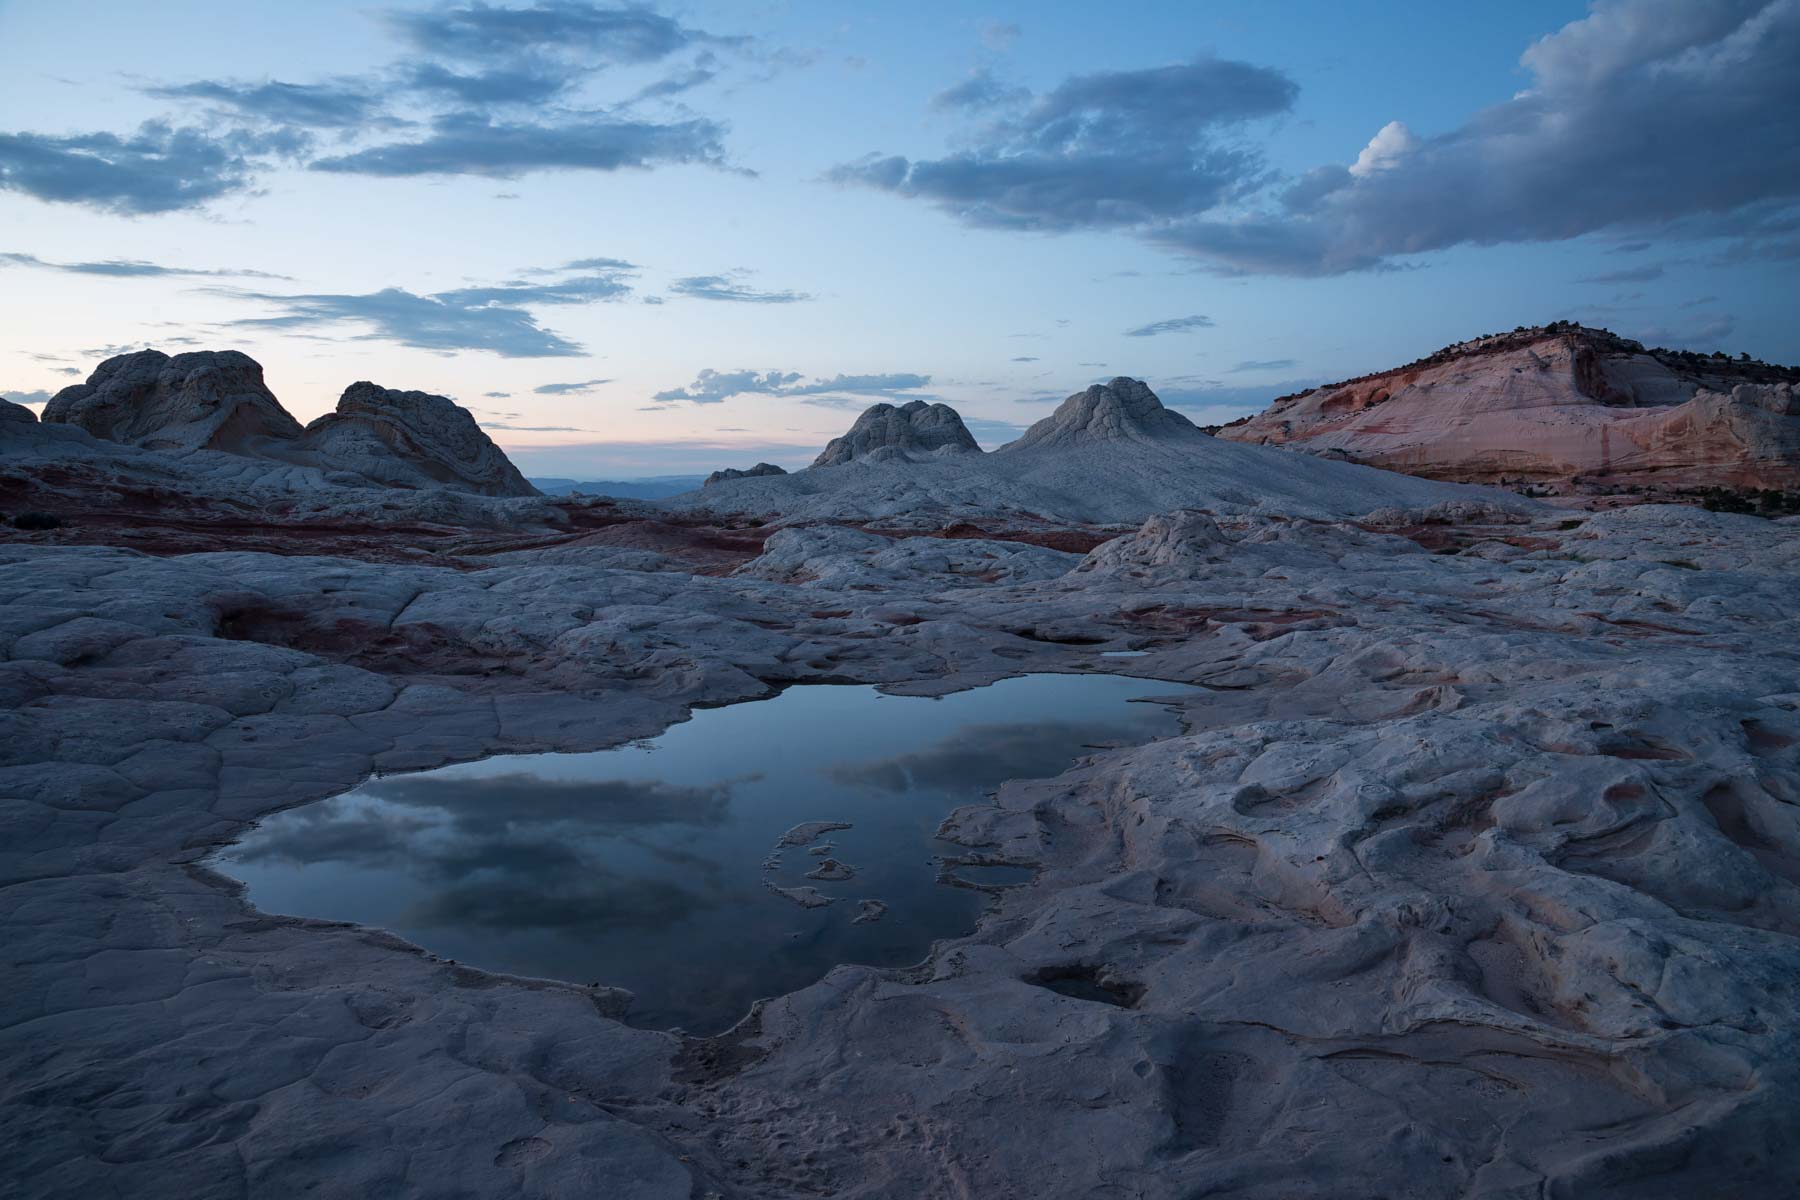 After sunset at The White Pocket in Vermilion Cliffs National Monument